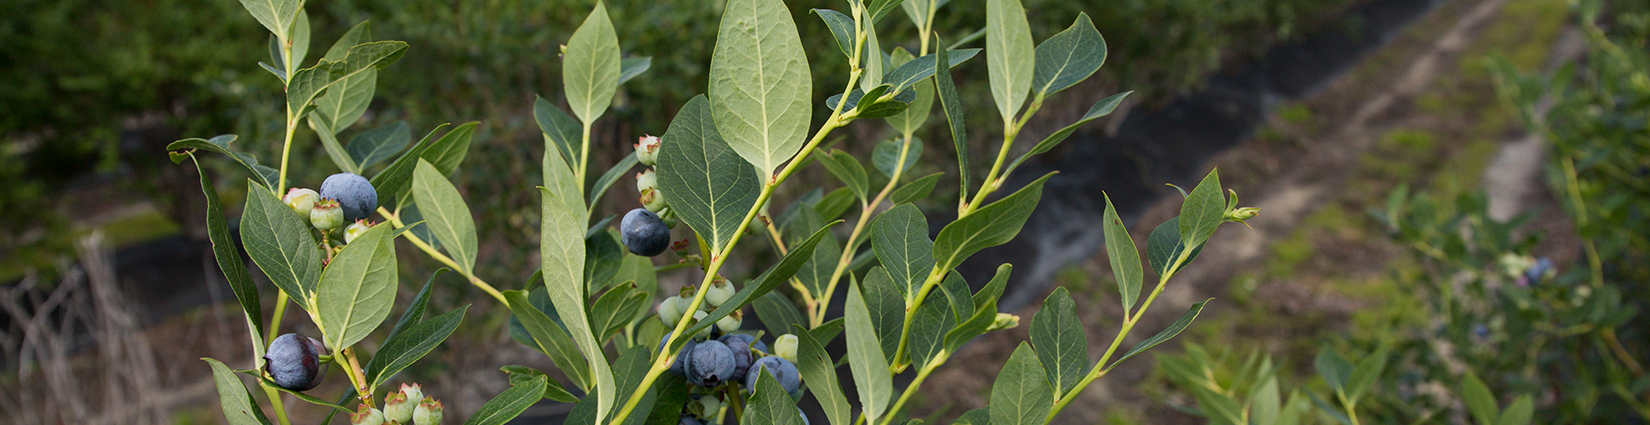 close-up of blueberry bush in field